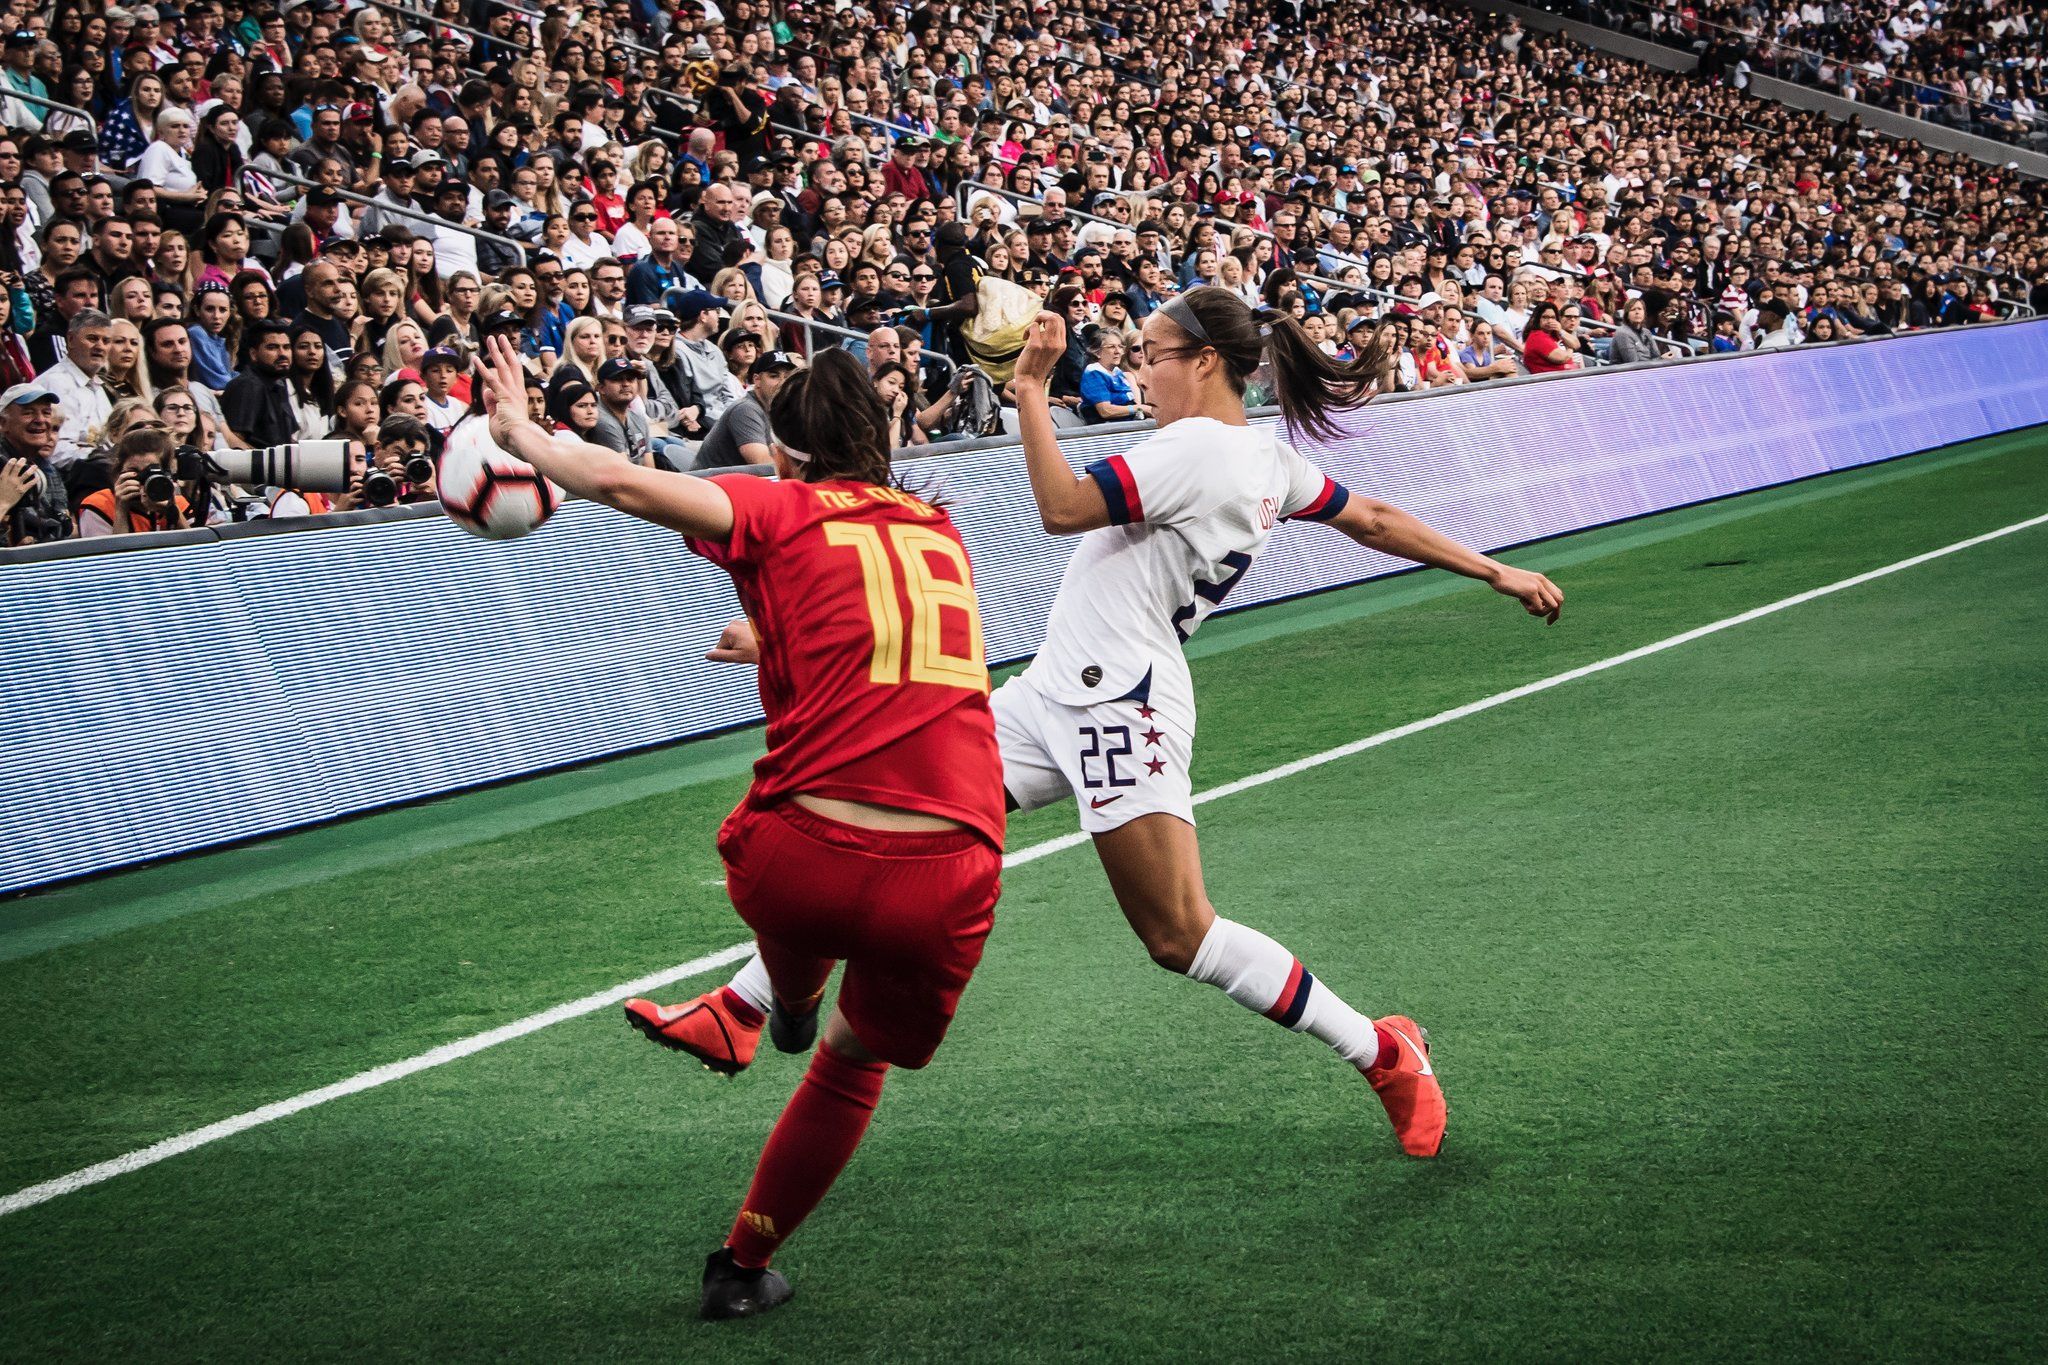 The Best Women's Soccer Team in the World Fights for Equal Pay